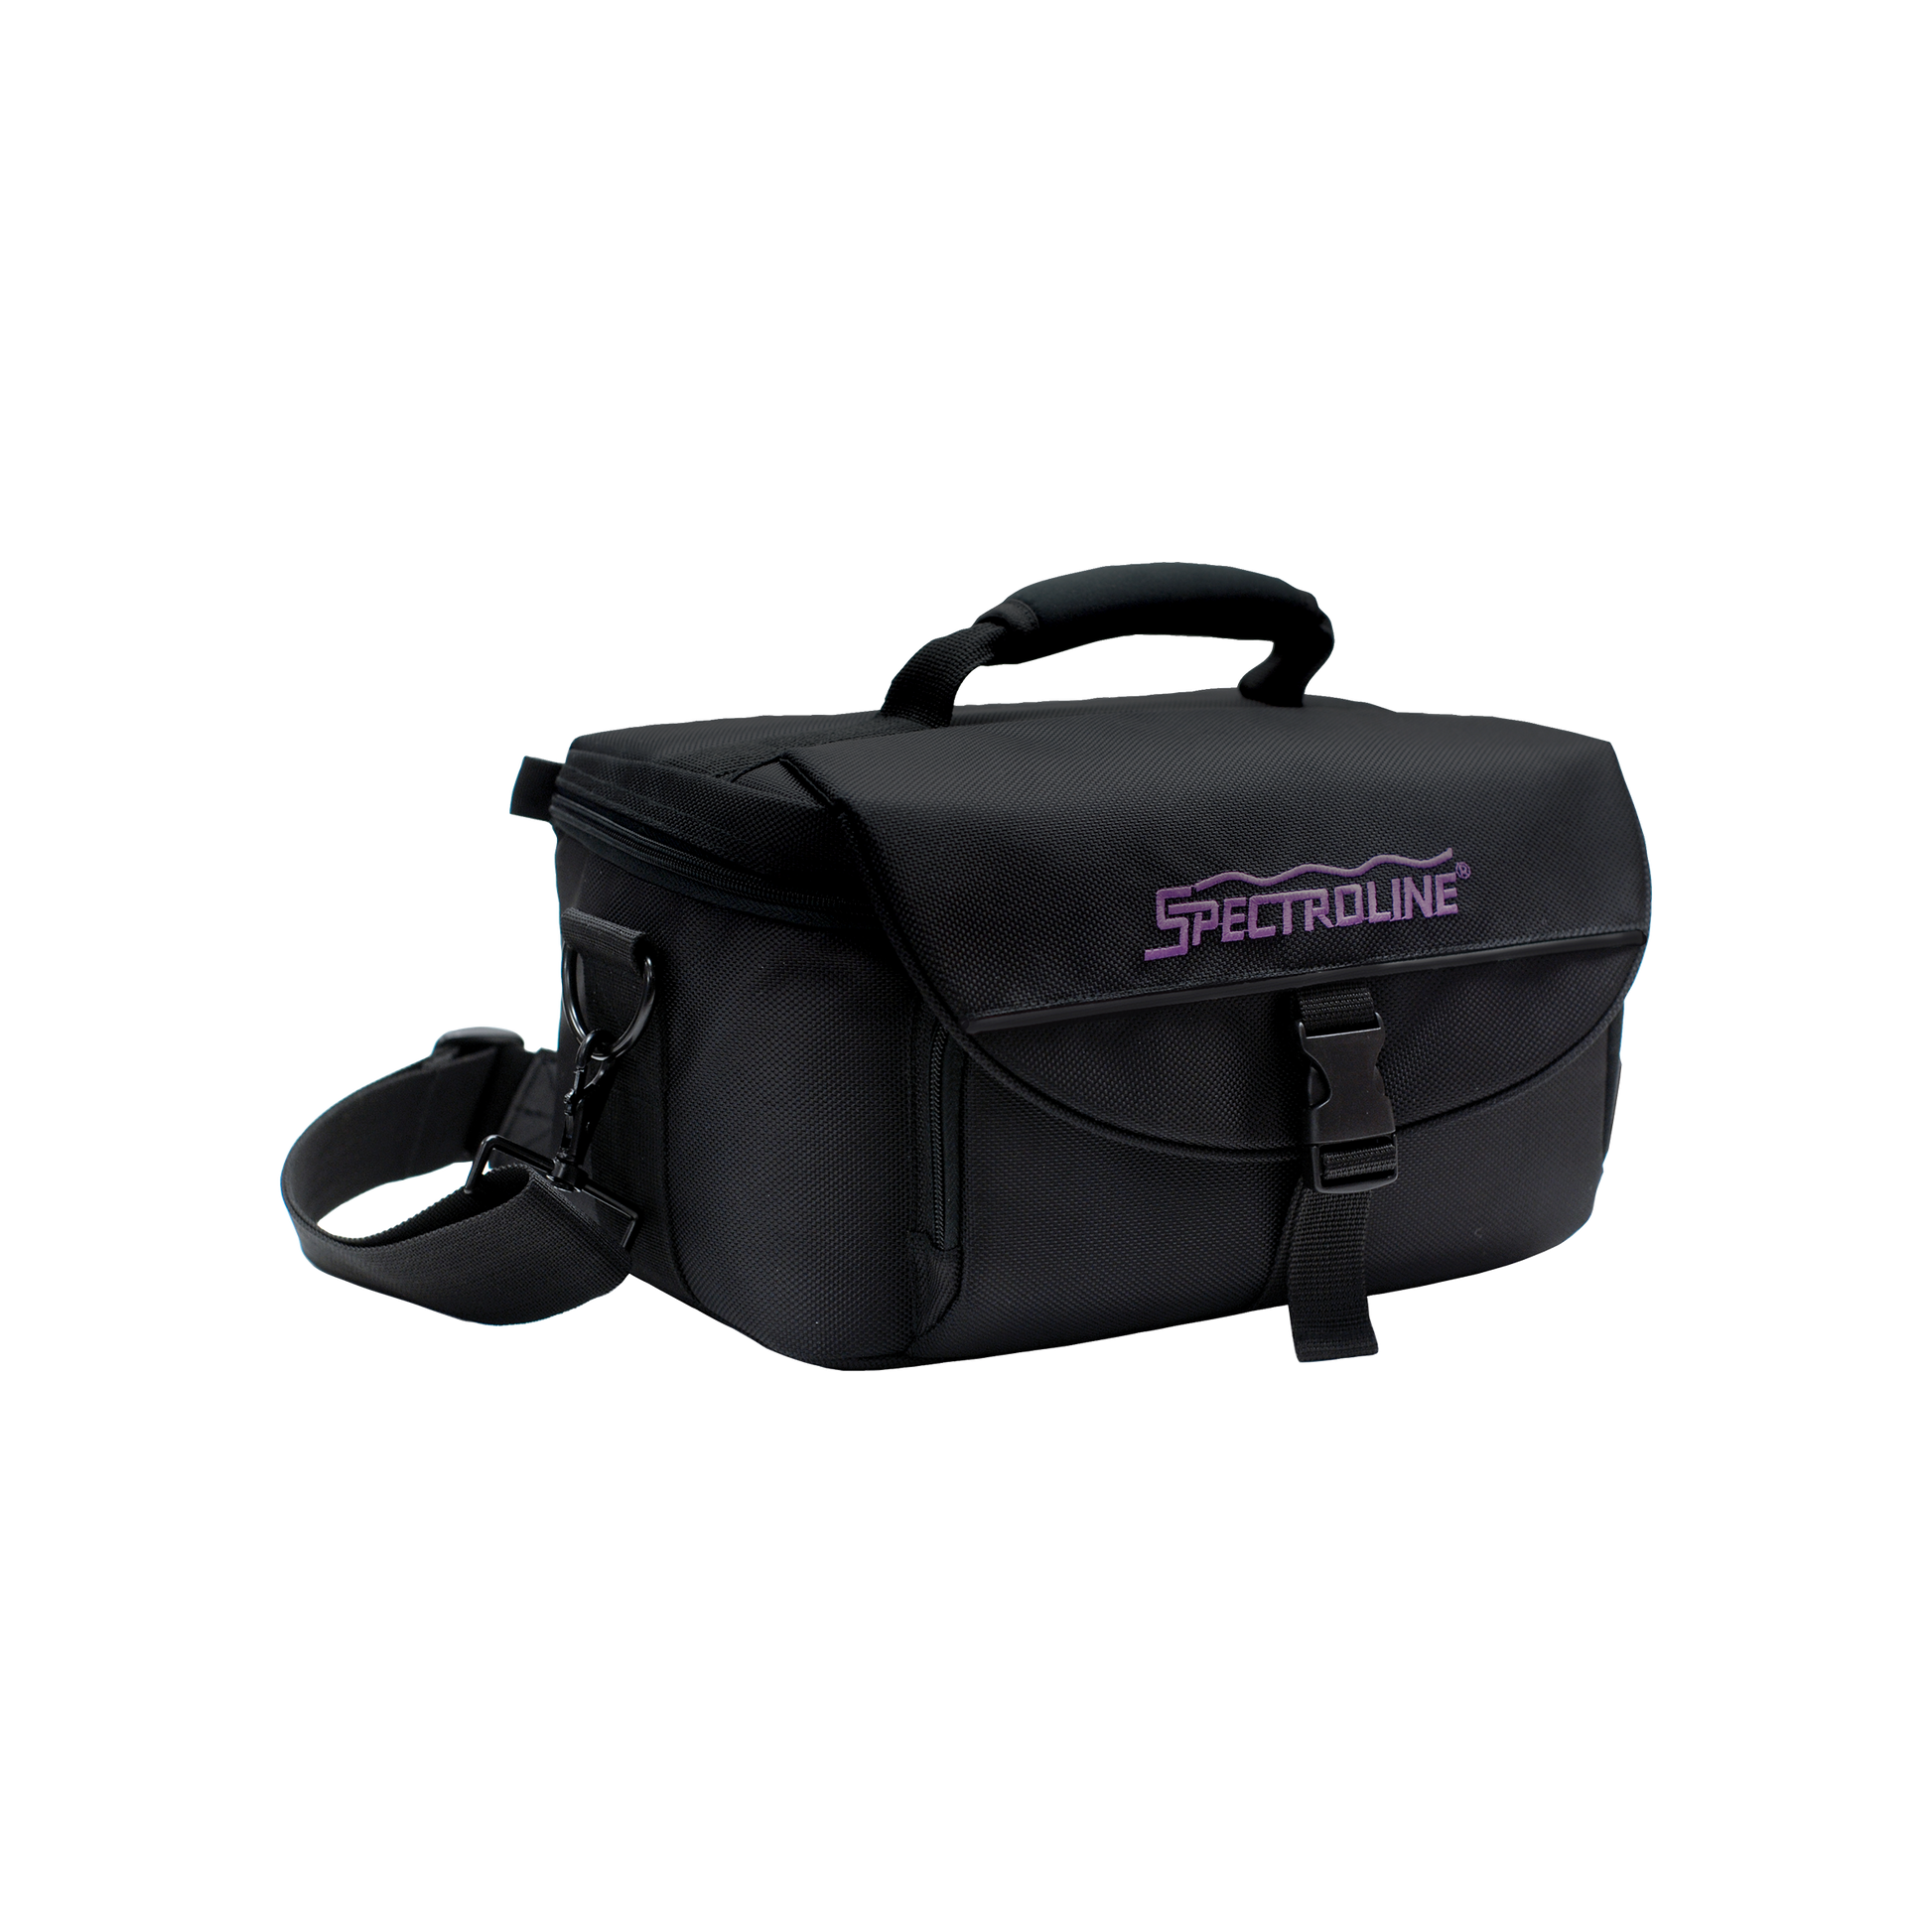 Spectroline NDT Spare Part, CC-370A, soft padded carrying case for uvision lamp, spectroline ndt padded carrying case